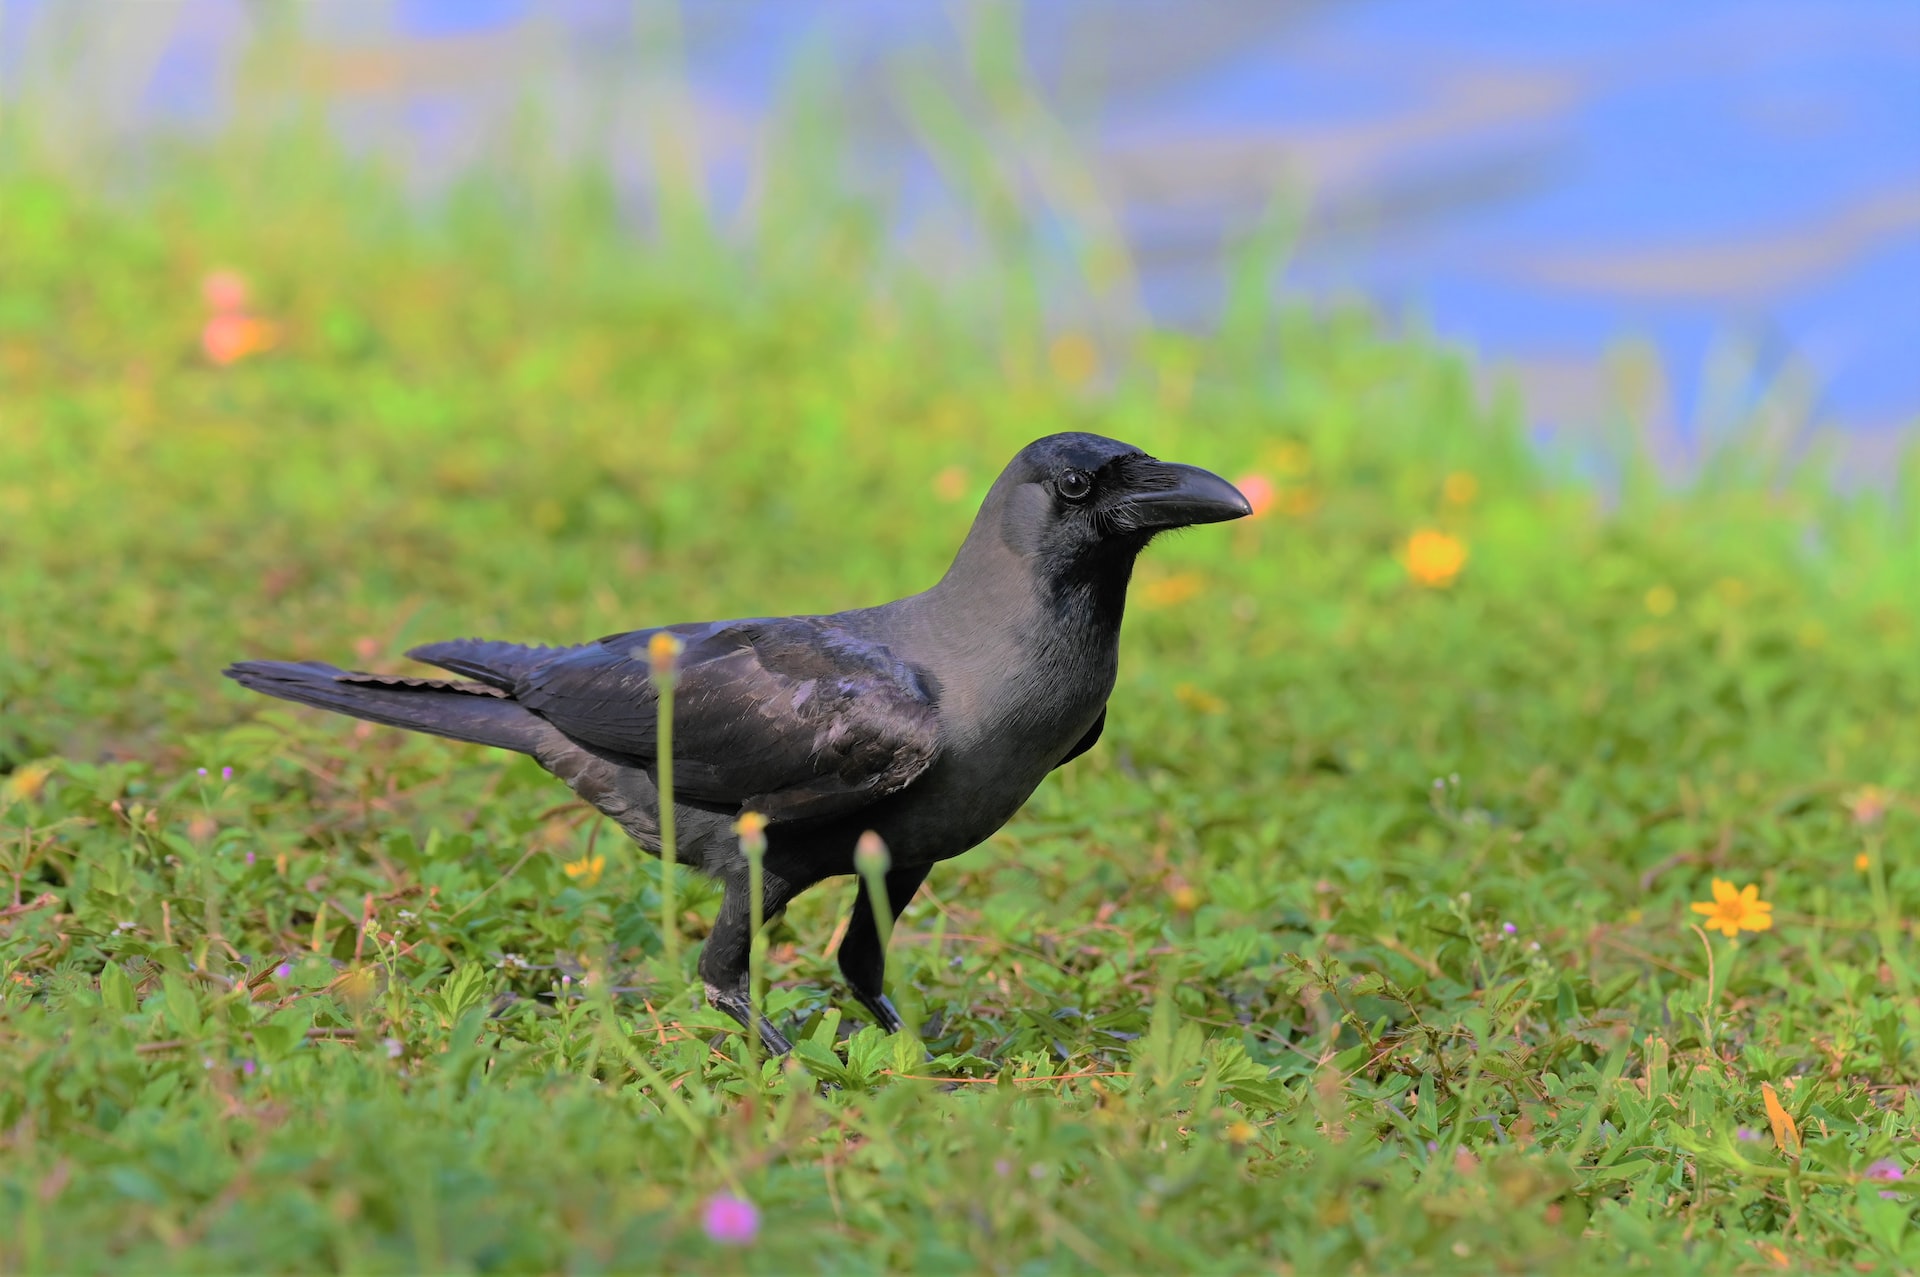 Meaning Of A Black Crow - Do They Signify Death And Bad Omen?